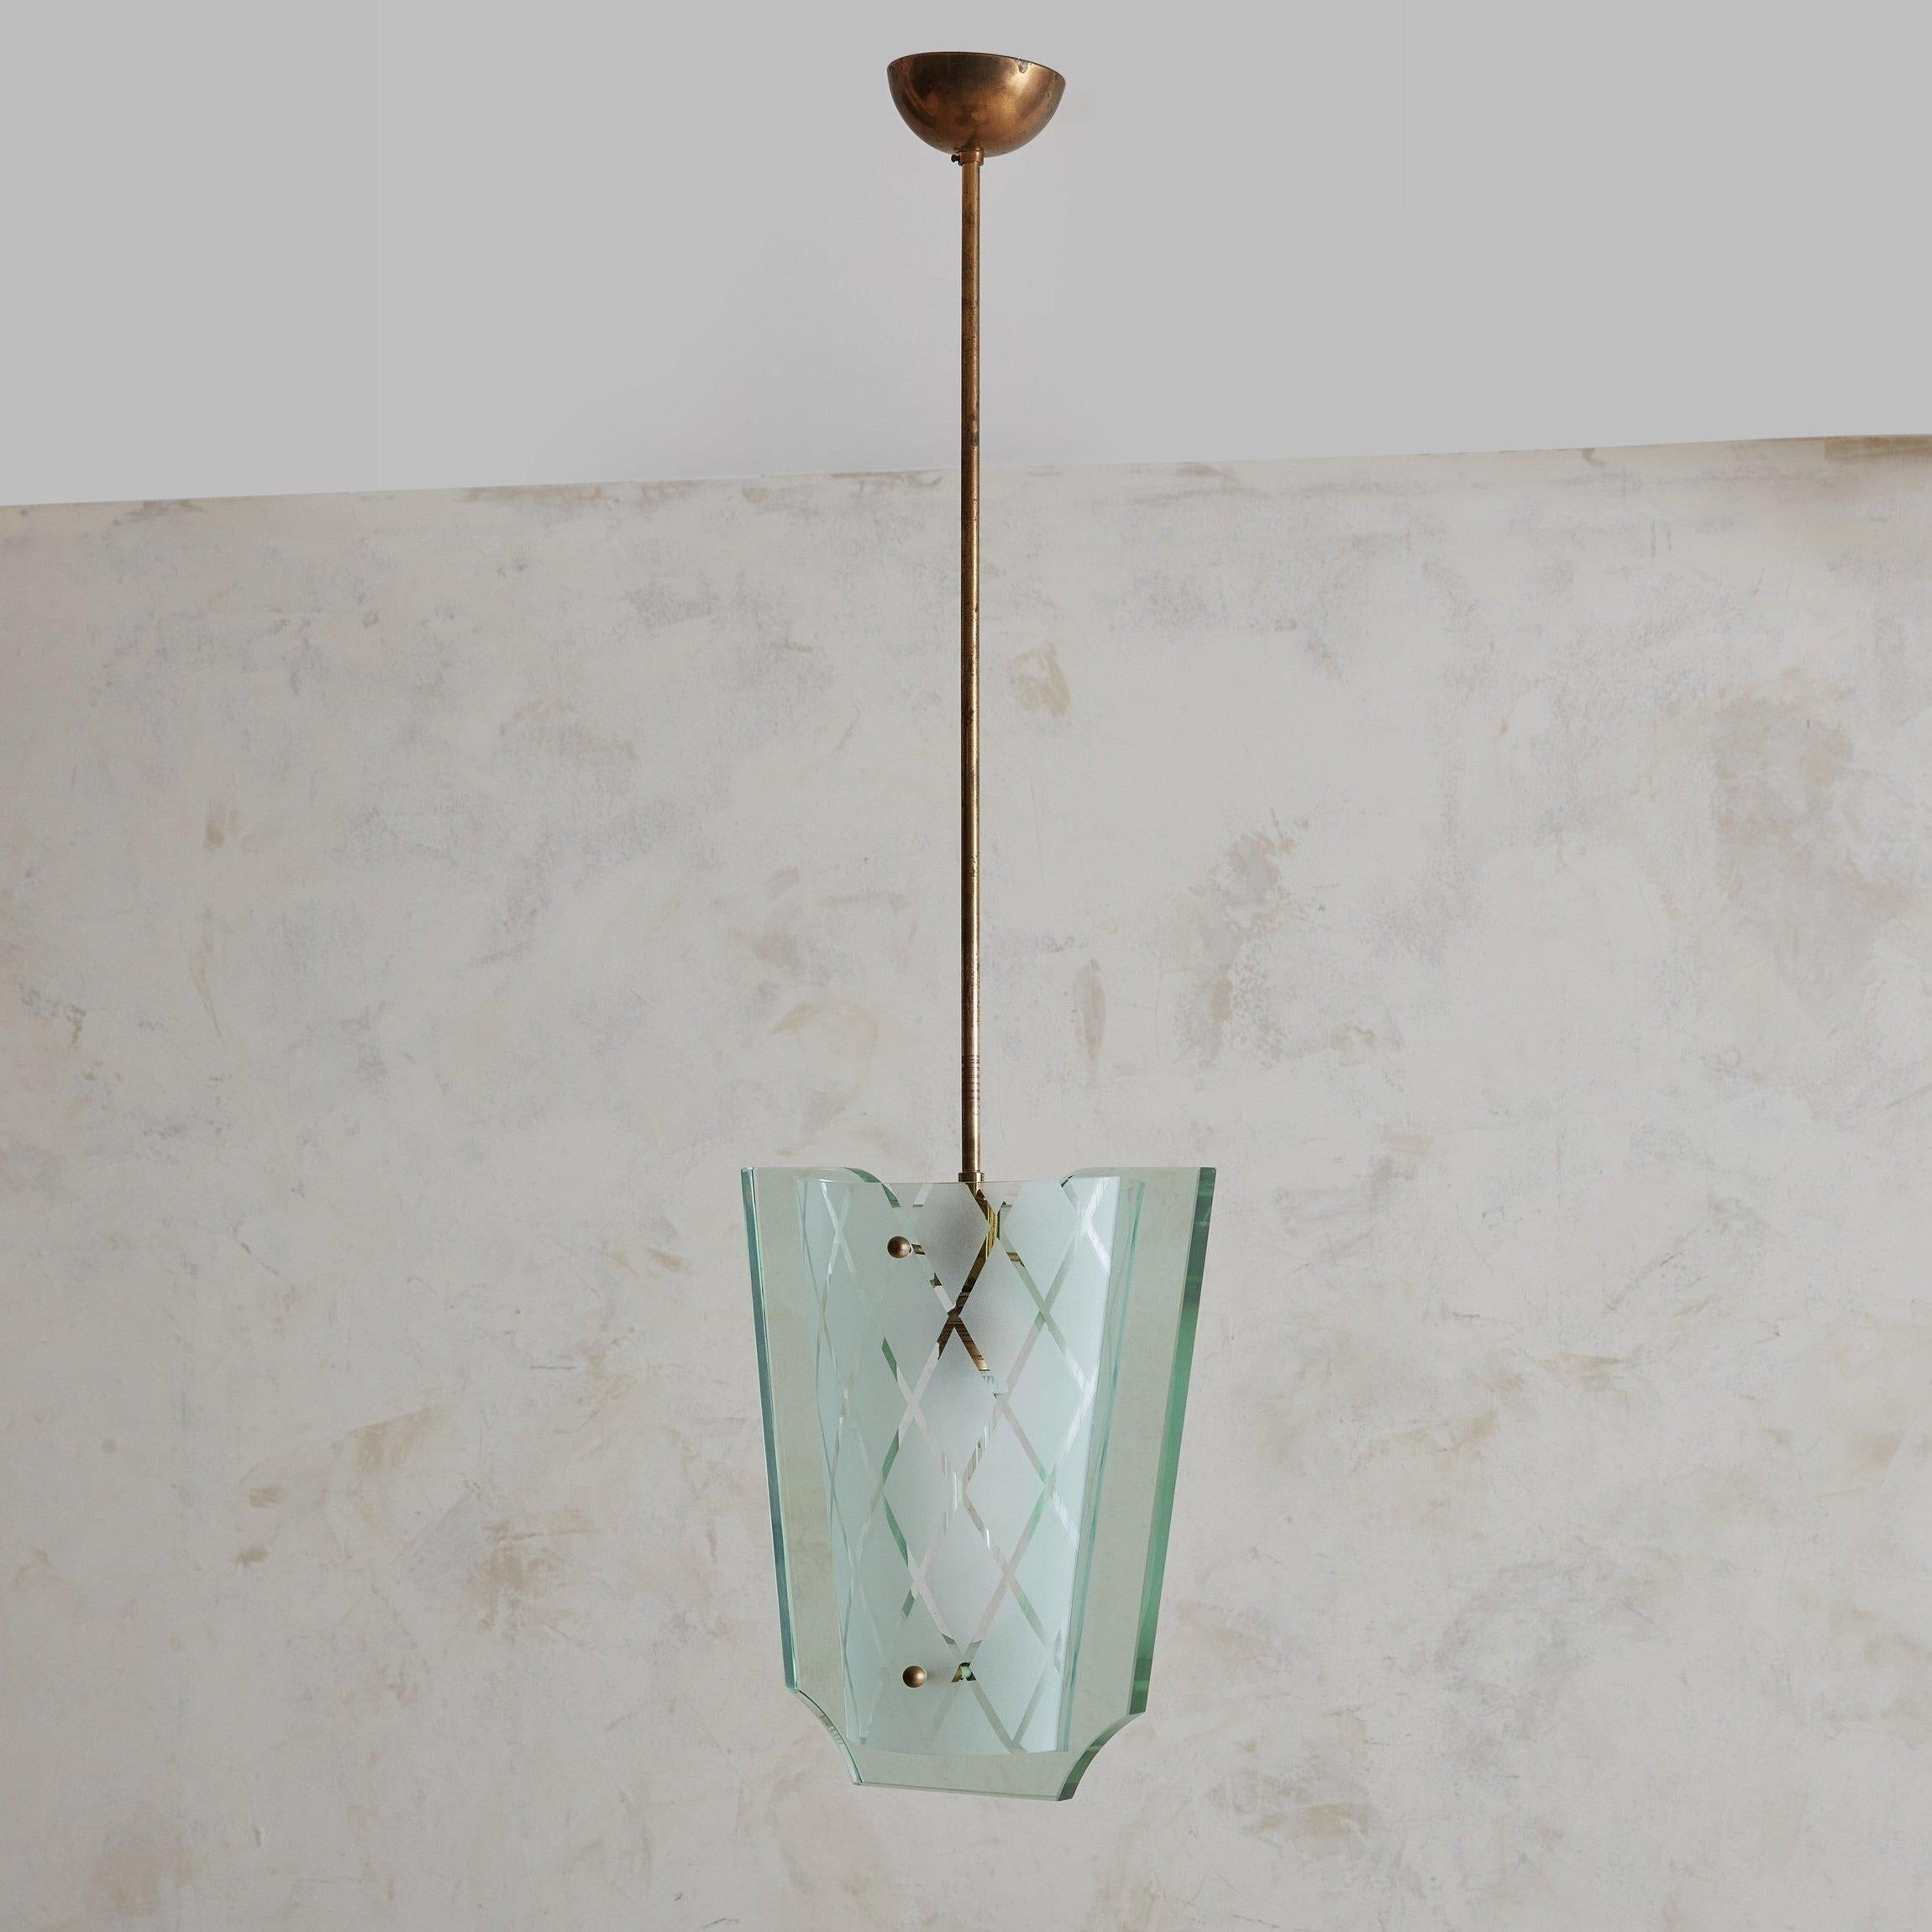 A rare pendant light by Pietro Chiesa for Fontana Arte featuring stunning green hued cut glass, a patinaed brass frame, and original canopy. The brass frame supports a single sheet of glass enclosed by two curved glass panels with etched diamond